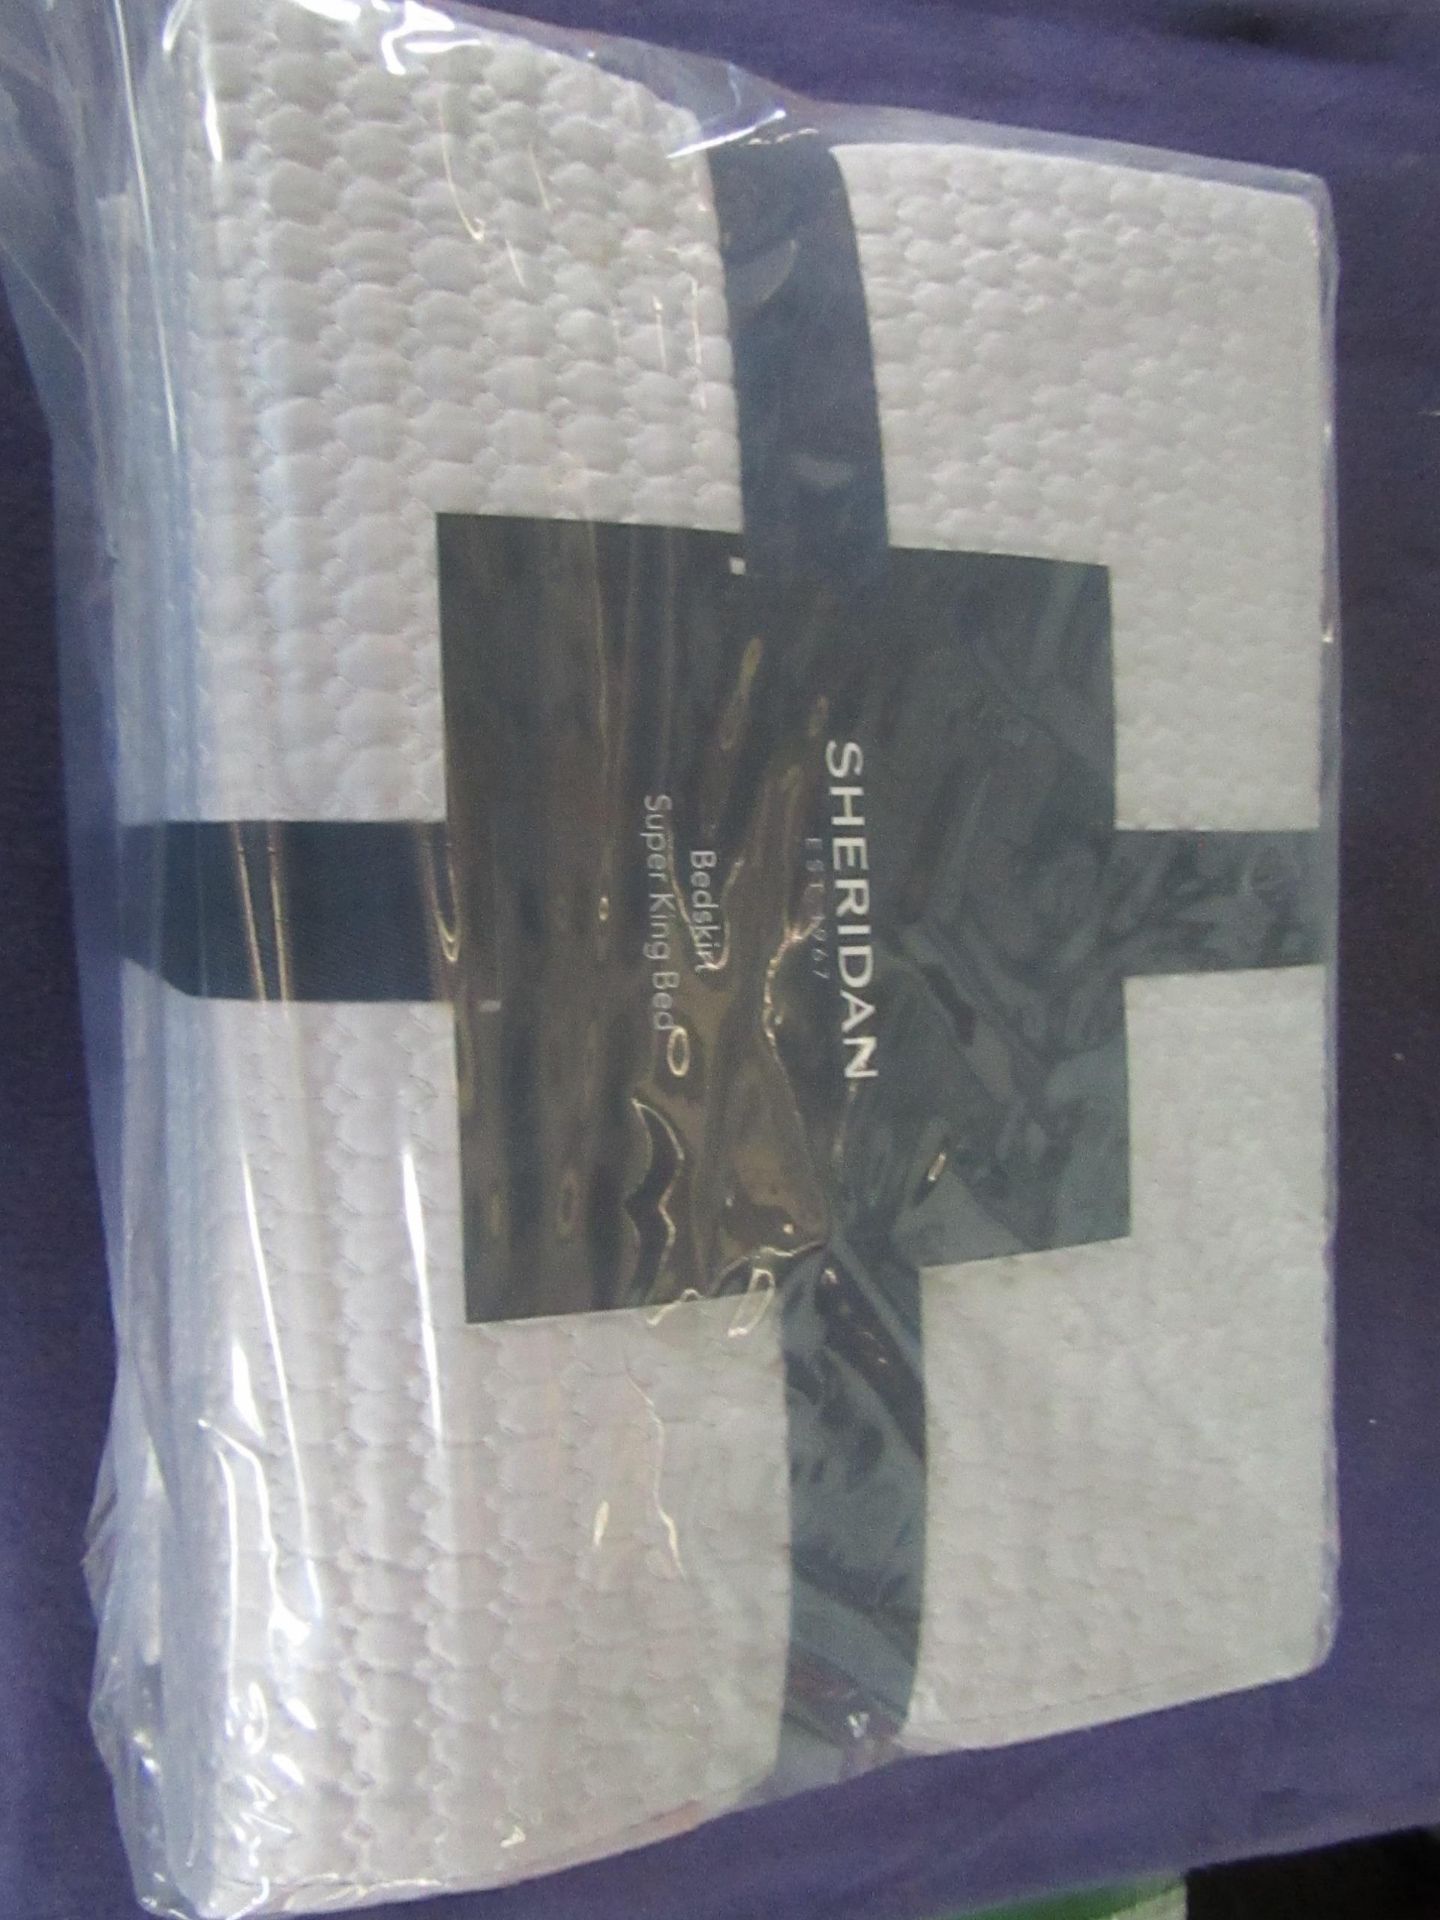 3x Sheridan - Dove Super King Sized Bed Skirt - New & Packaged. RRP œ75.